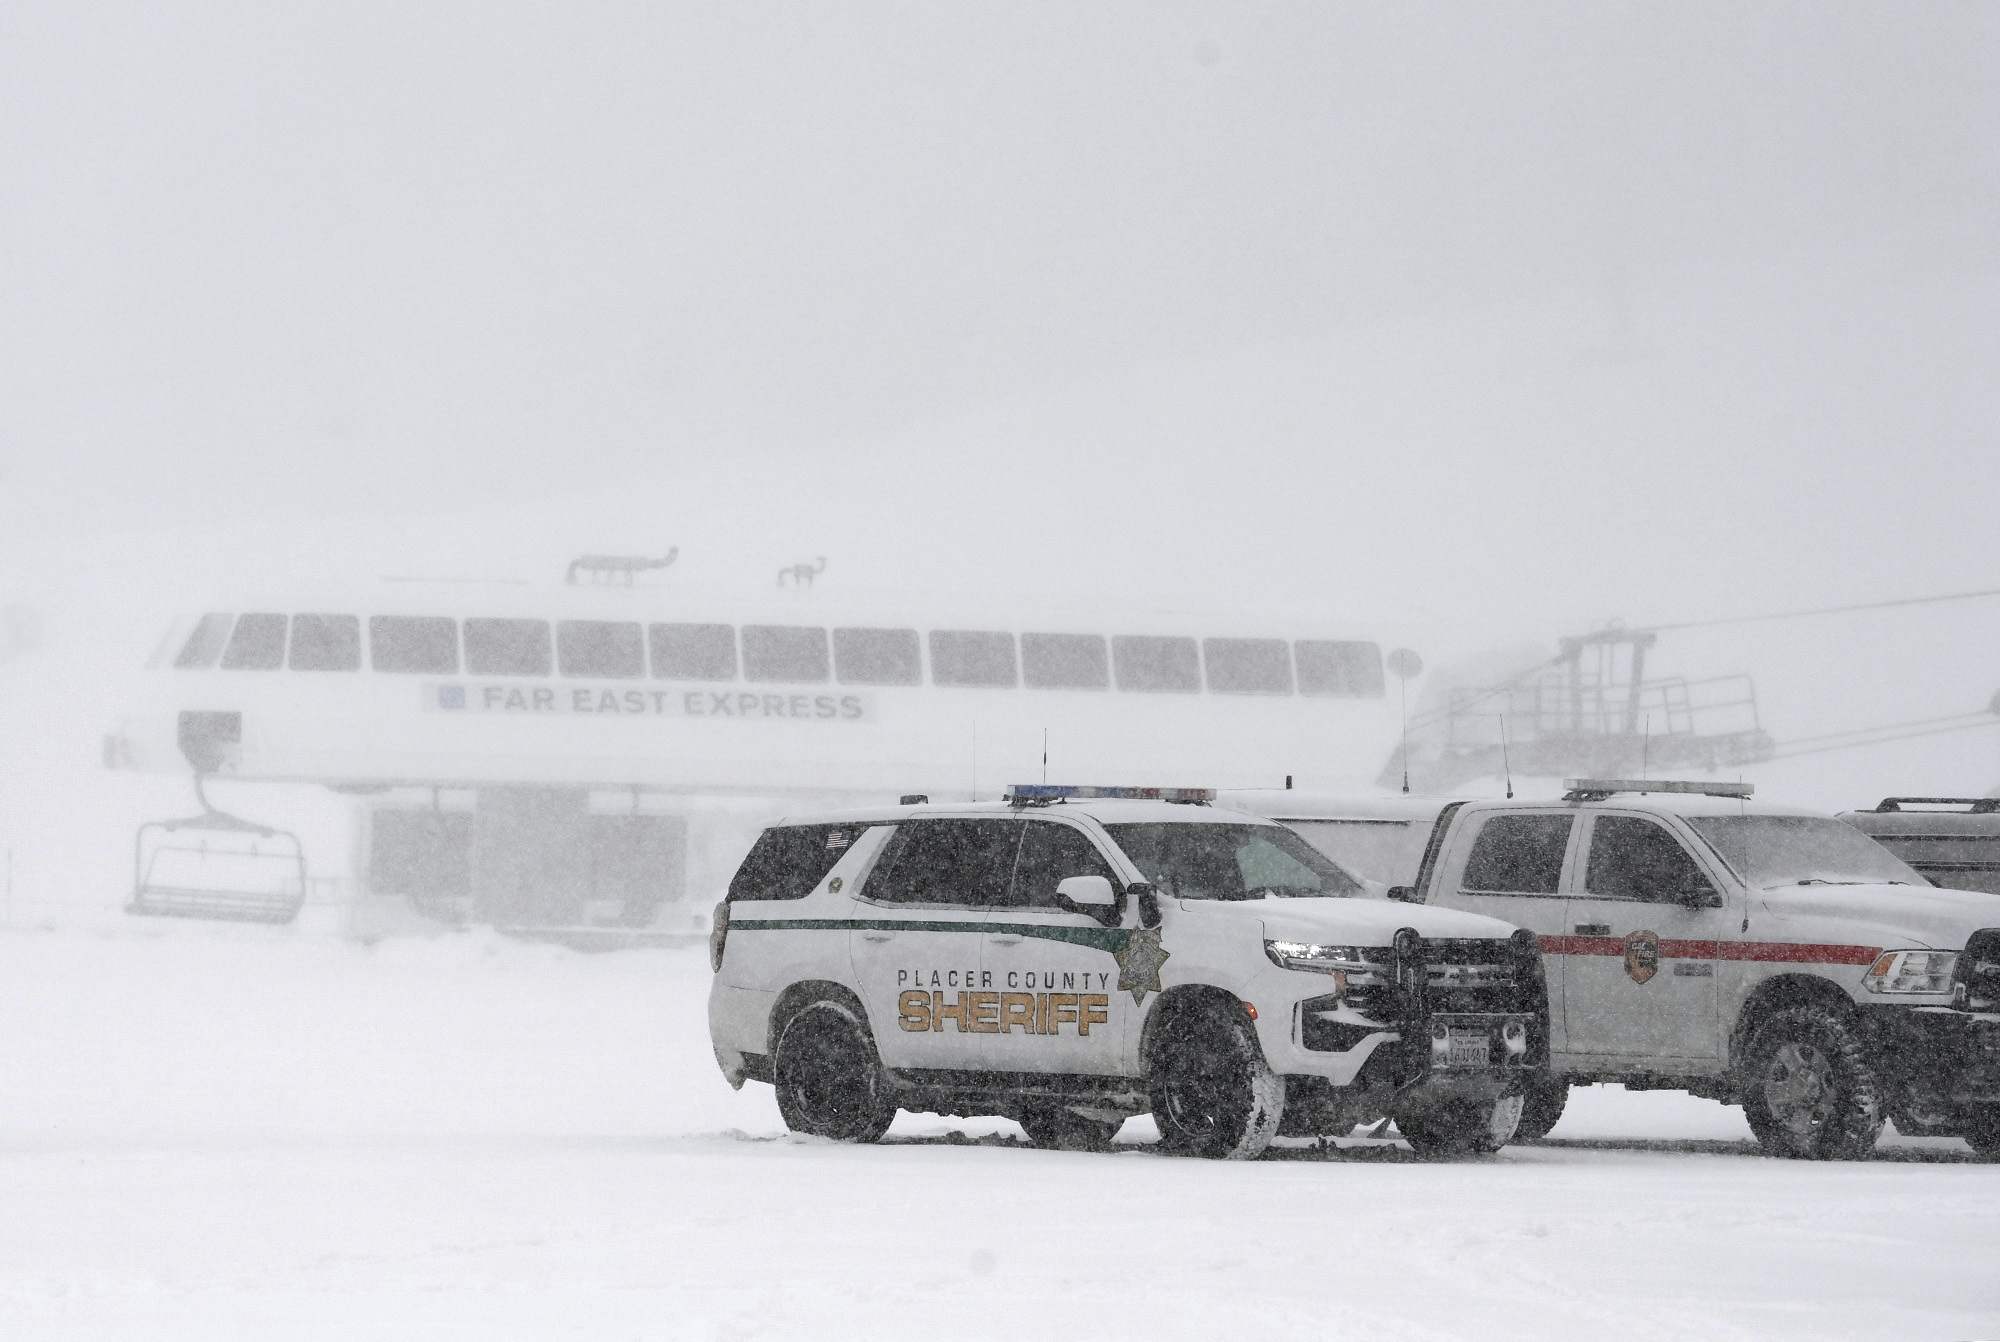 Vehicles parked with ski lift in the background as snow falls